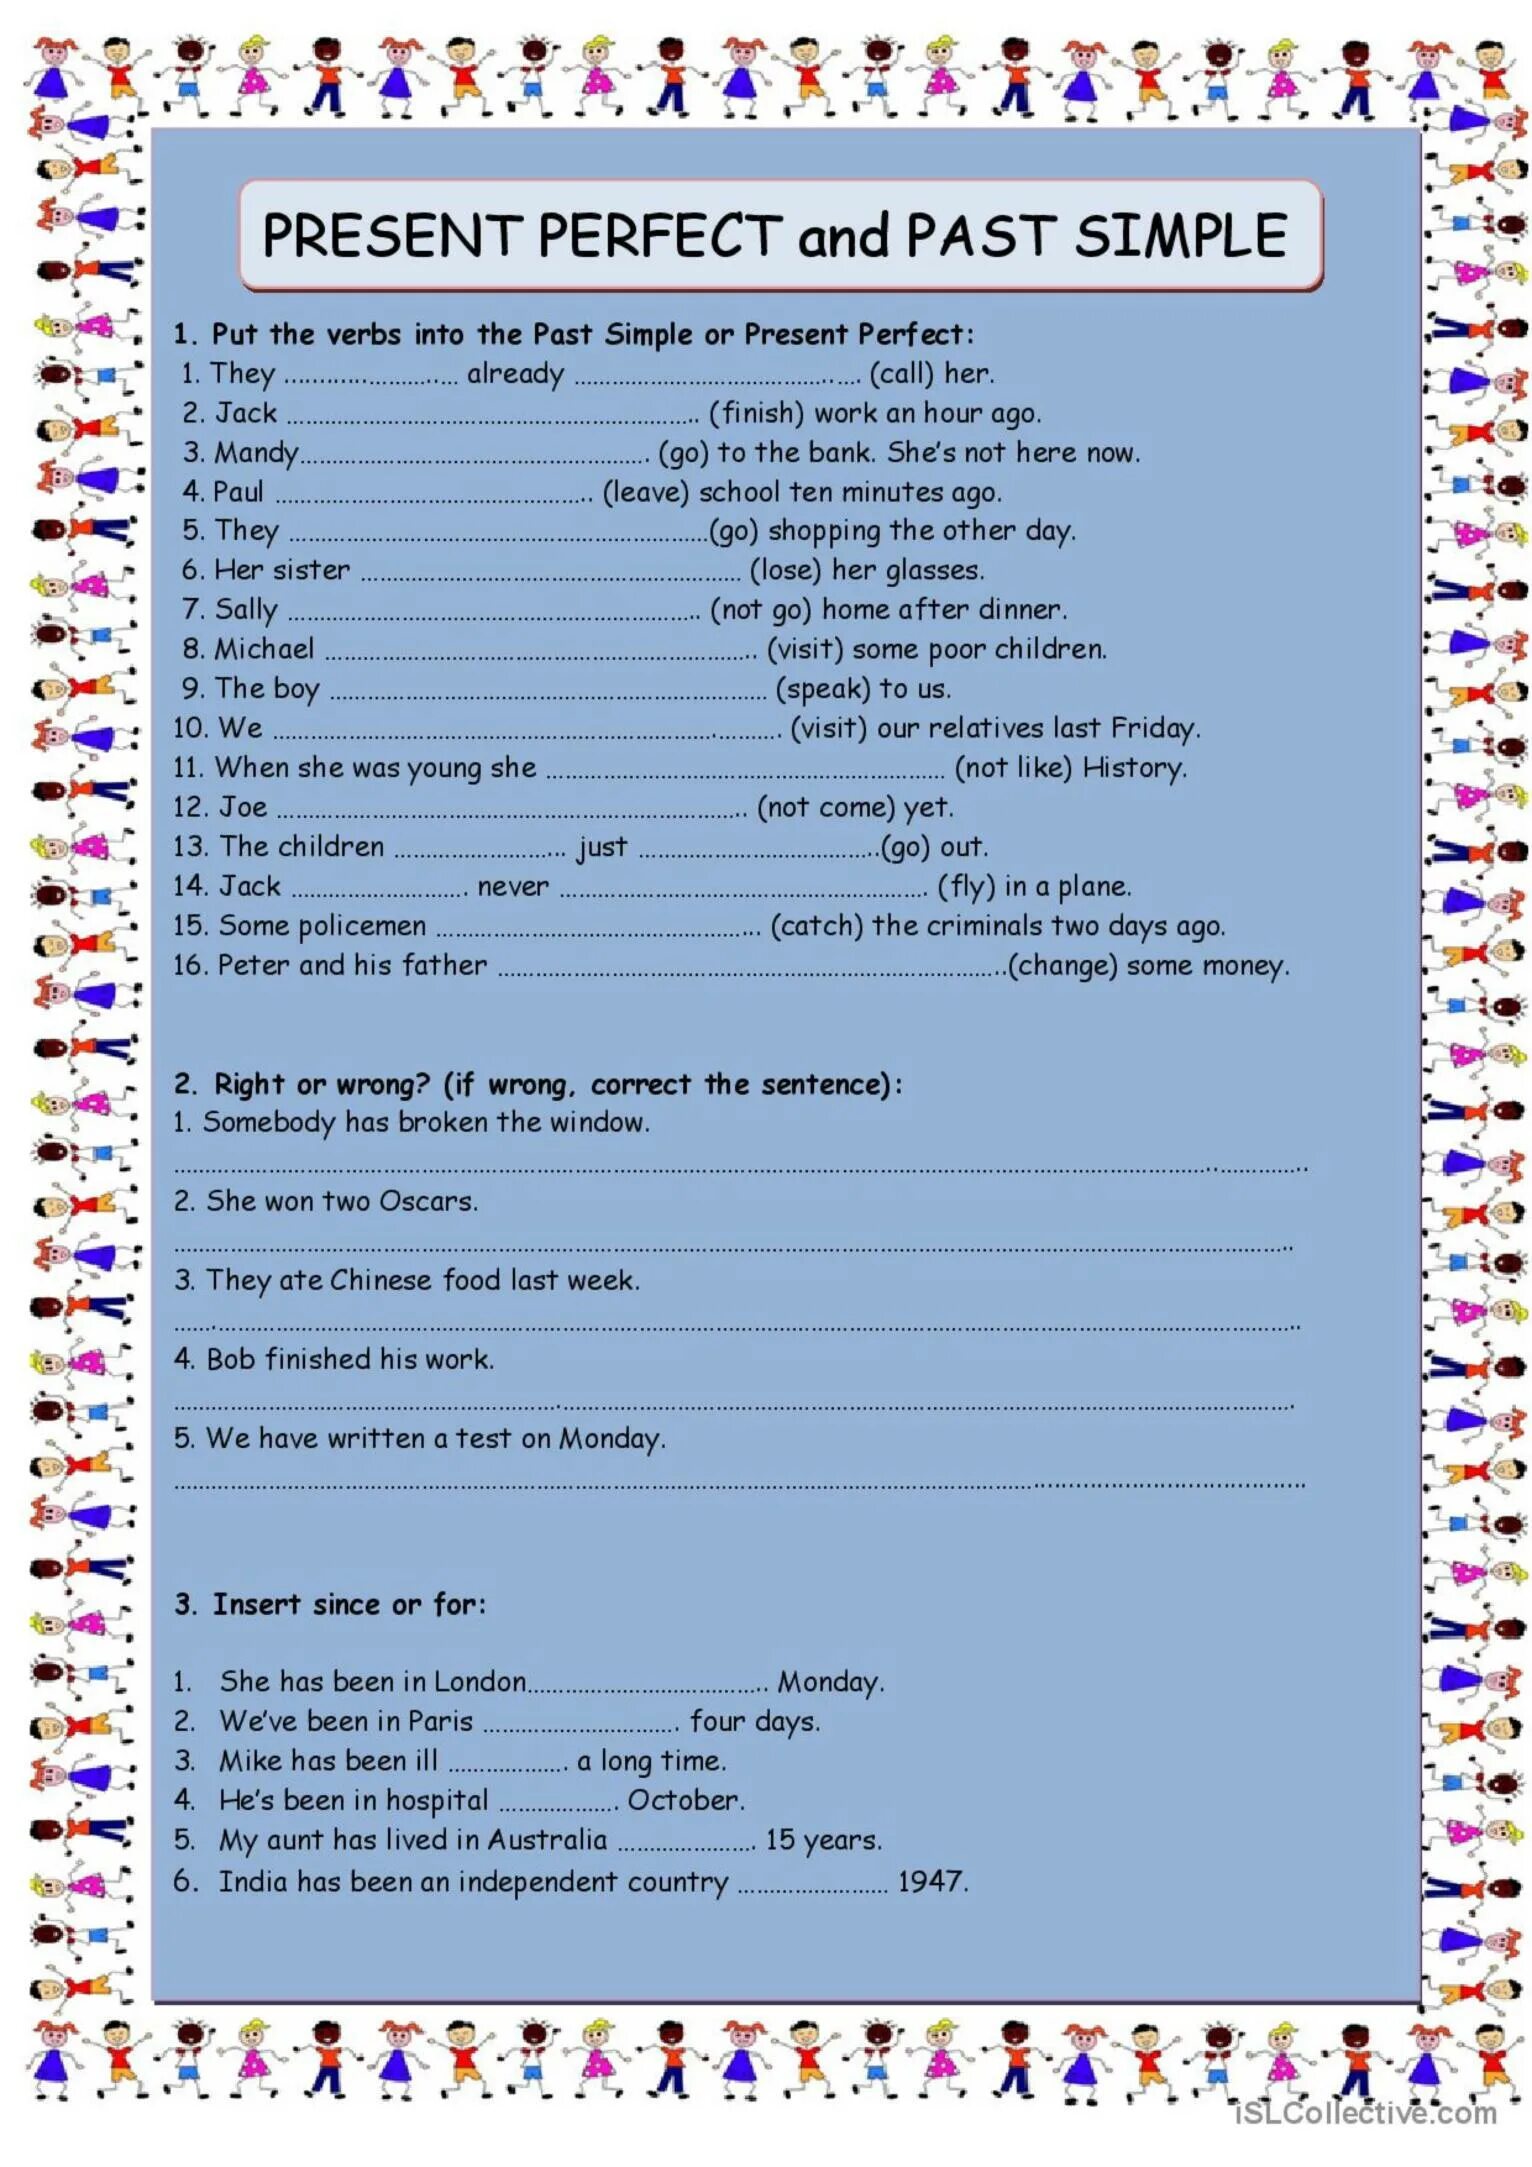 Present perfect past simple exercises Elementary. Exercises for present perfect and past simple. Past simple present perfect вопросы. Present perfect past simple Worksheets. Past simple past perfect worksheets pdf